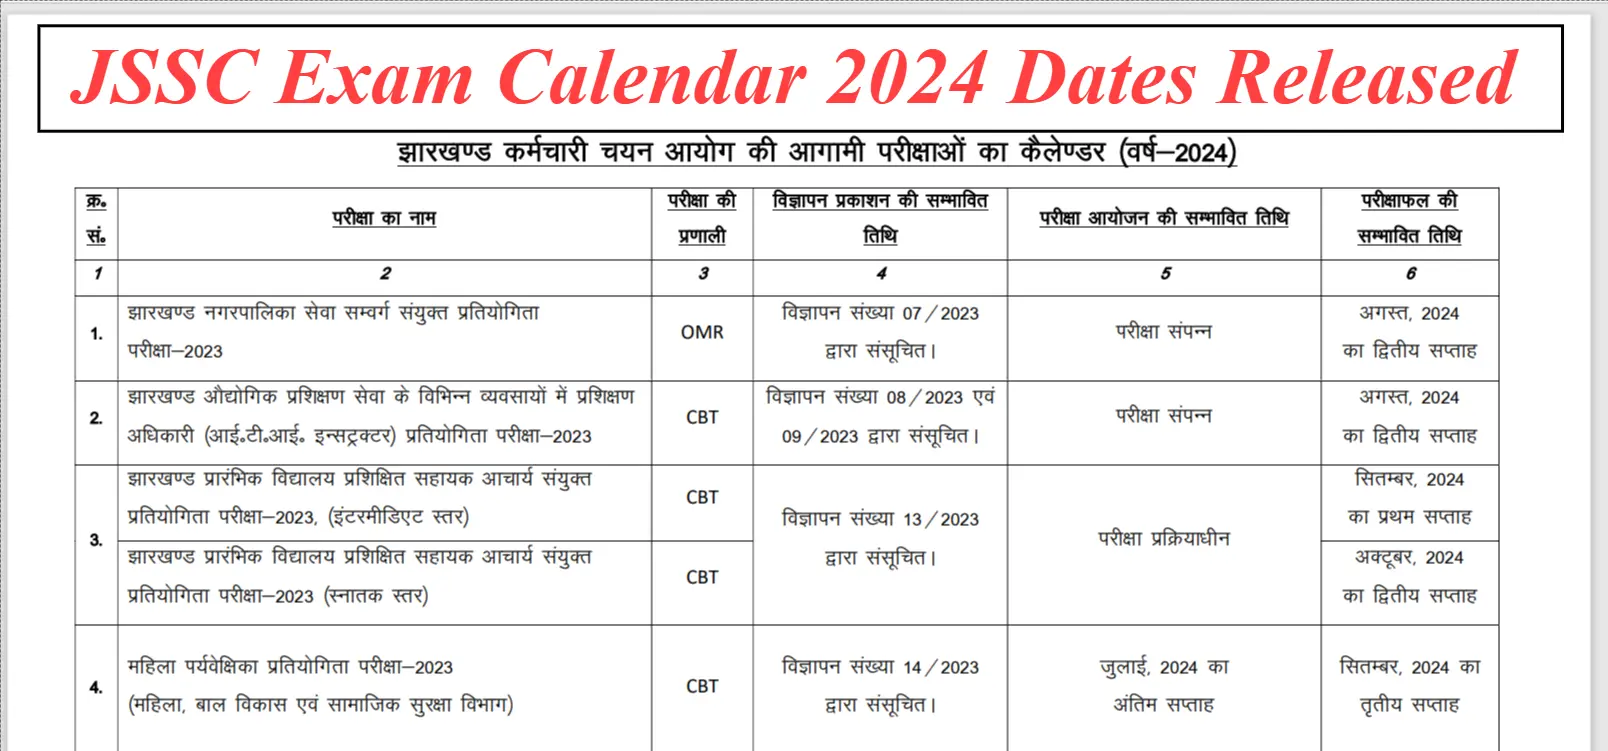 JSSC Exam Calendar 2024 Released - Don't Miss Out on These Crucial Dates!